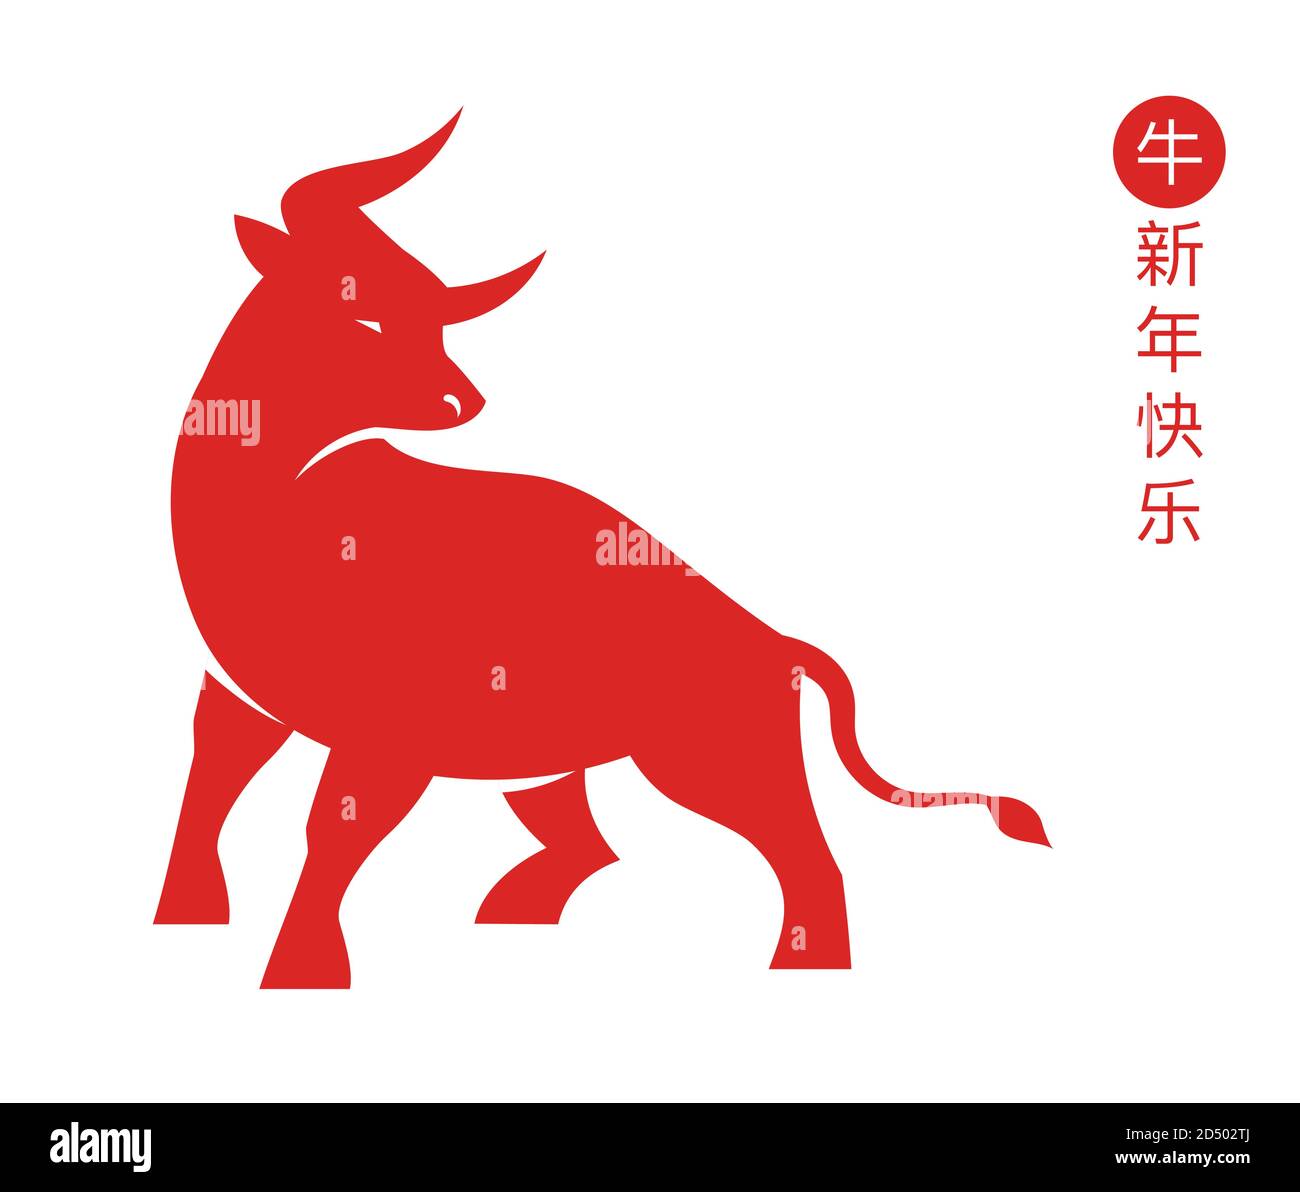 Chinese new year 2021 year of the ox, Chinese zodiac symbol, Chinese text says: Happy chinese new year 2021, year of ox Stock Vector